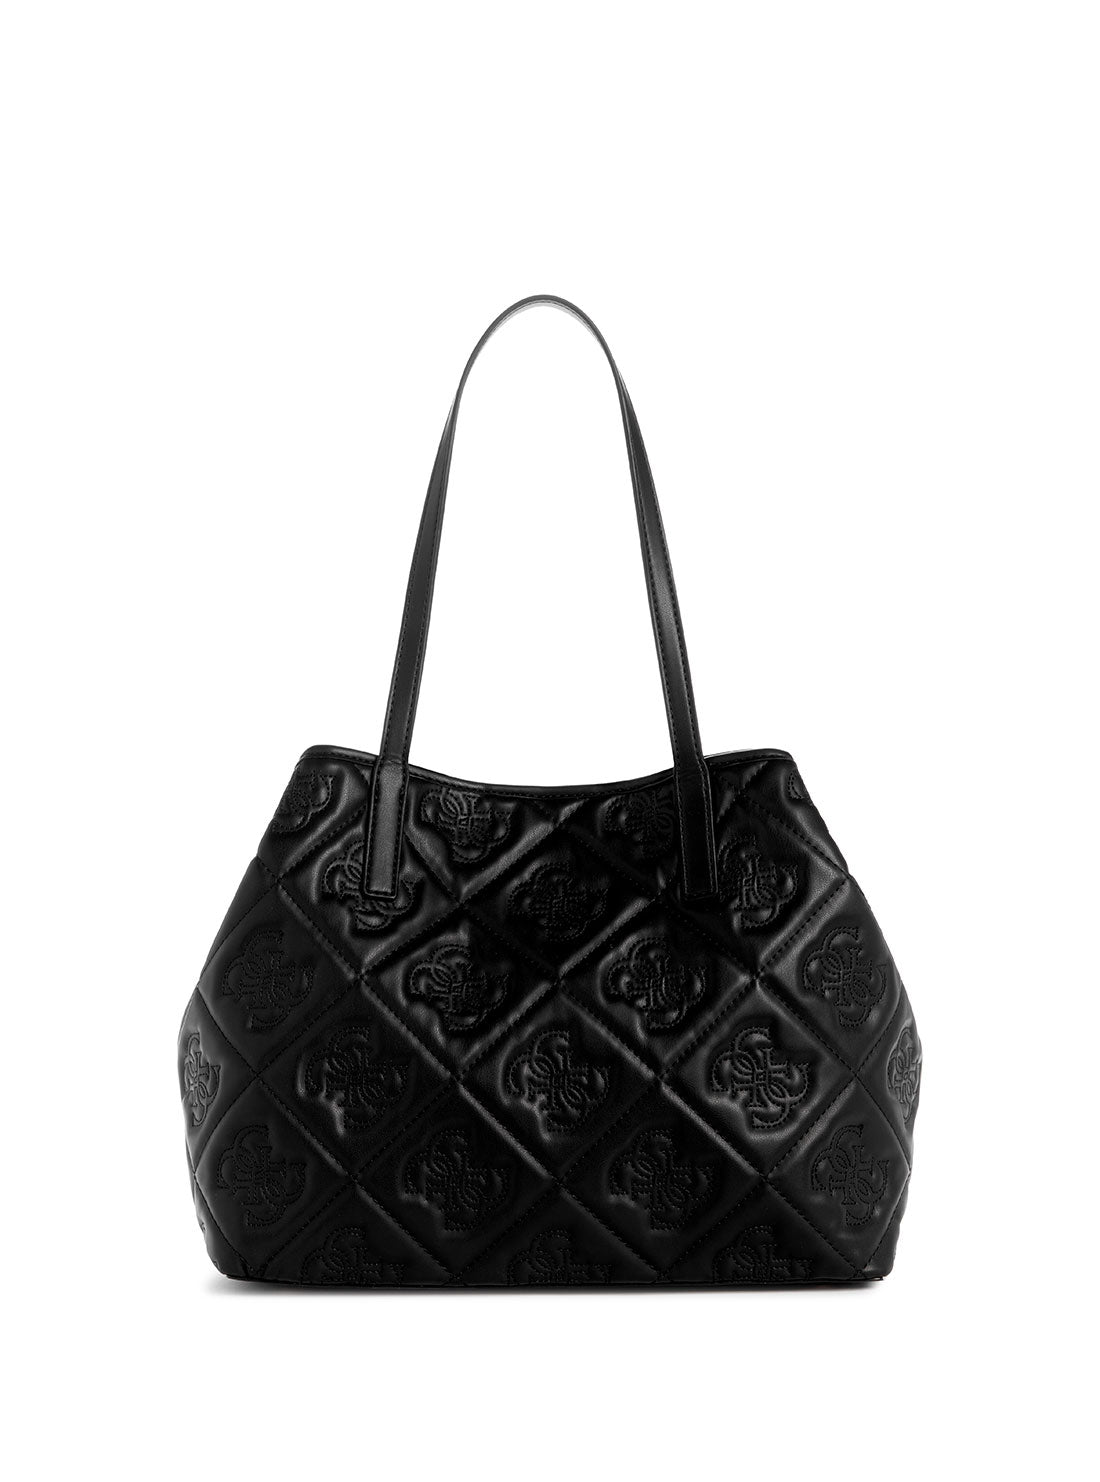 GUESS Black Logo Vikky 2 in 1 Tote Bag back view